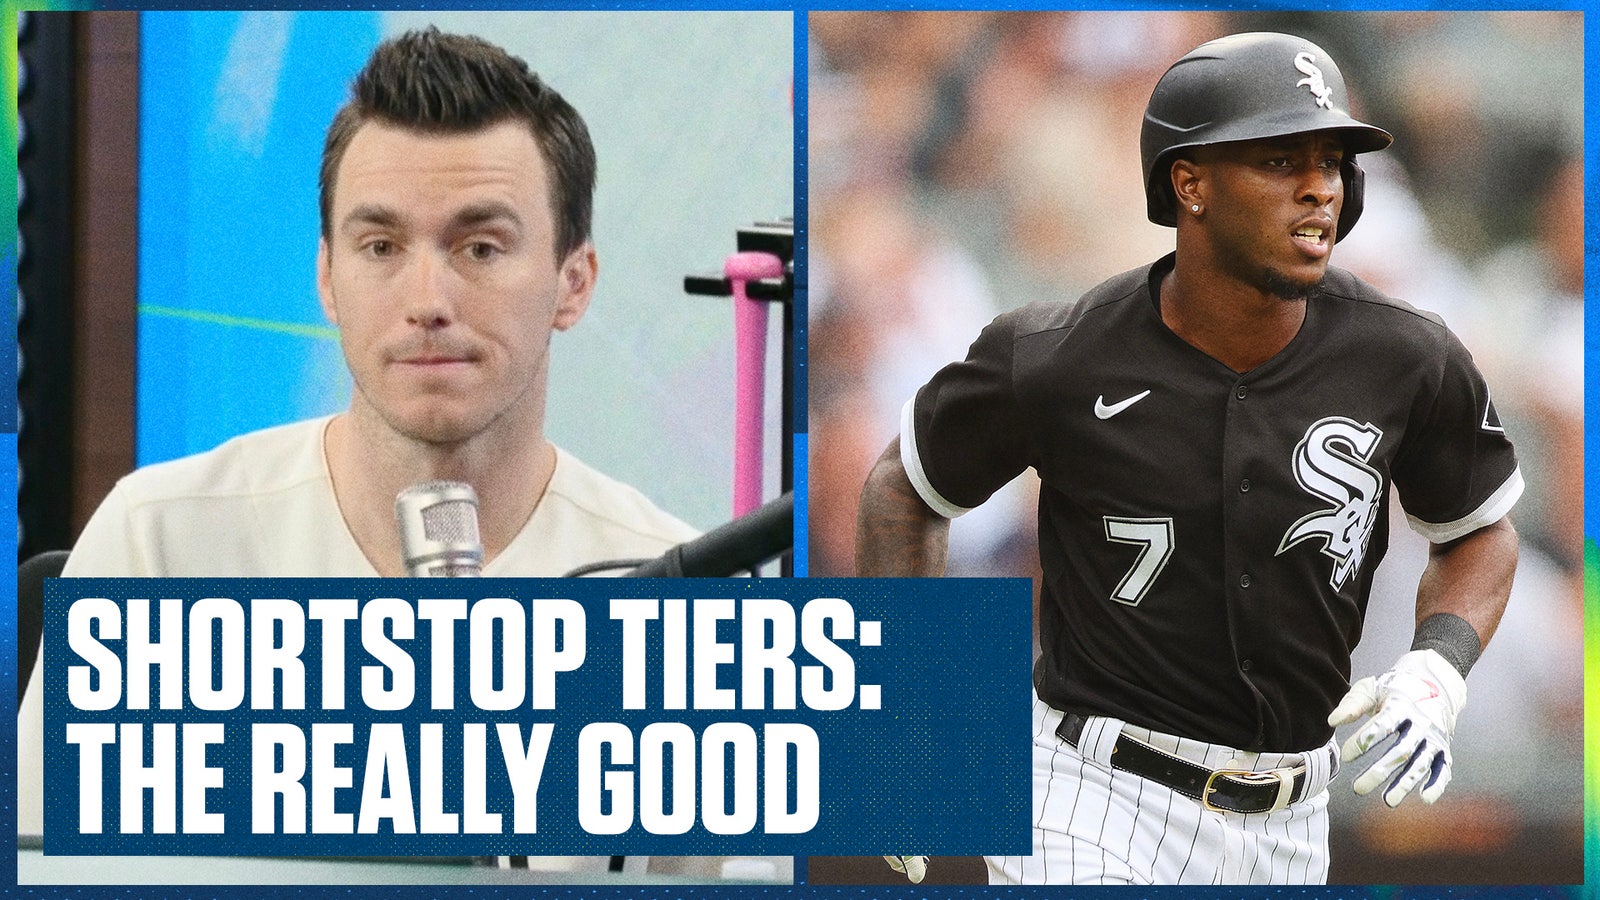 Jeremy Pena and Tim Anderson headline The Really Good SS Tier 